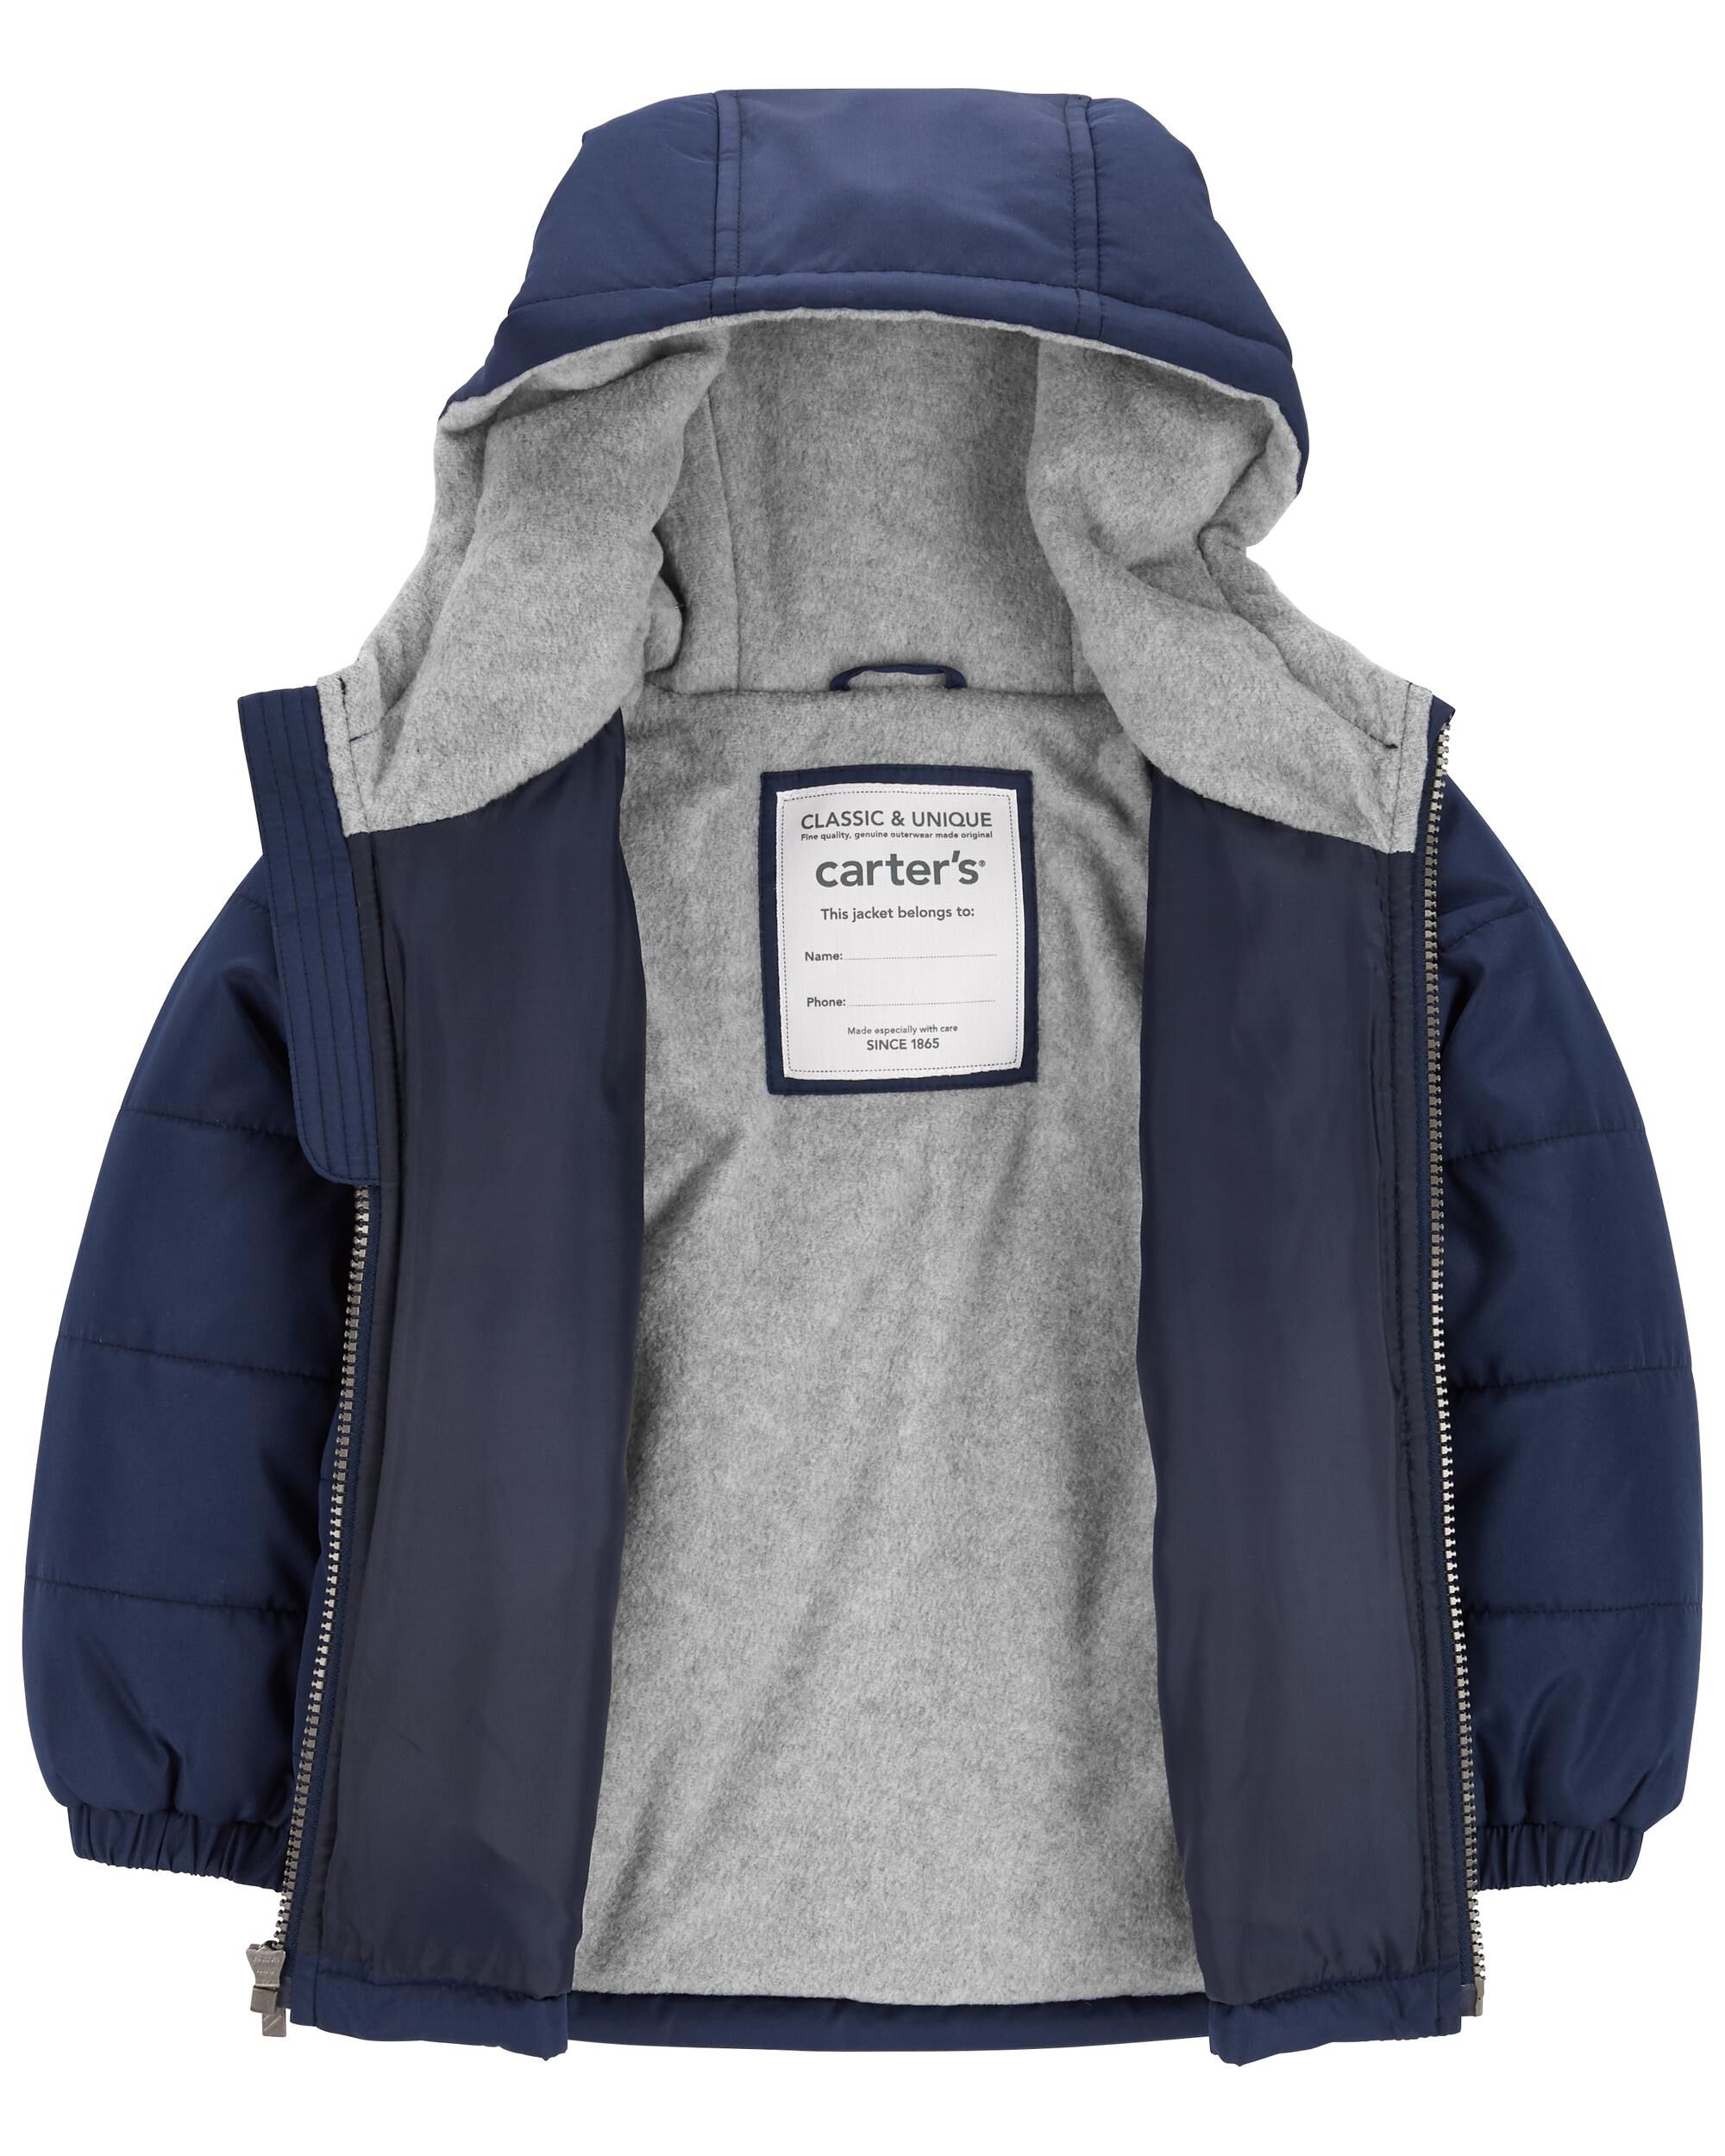 Toddler Boy Jackets & Outerwear | Carter's | Free Shipping